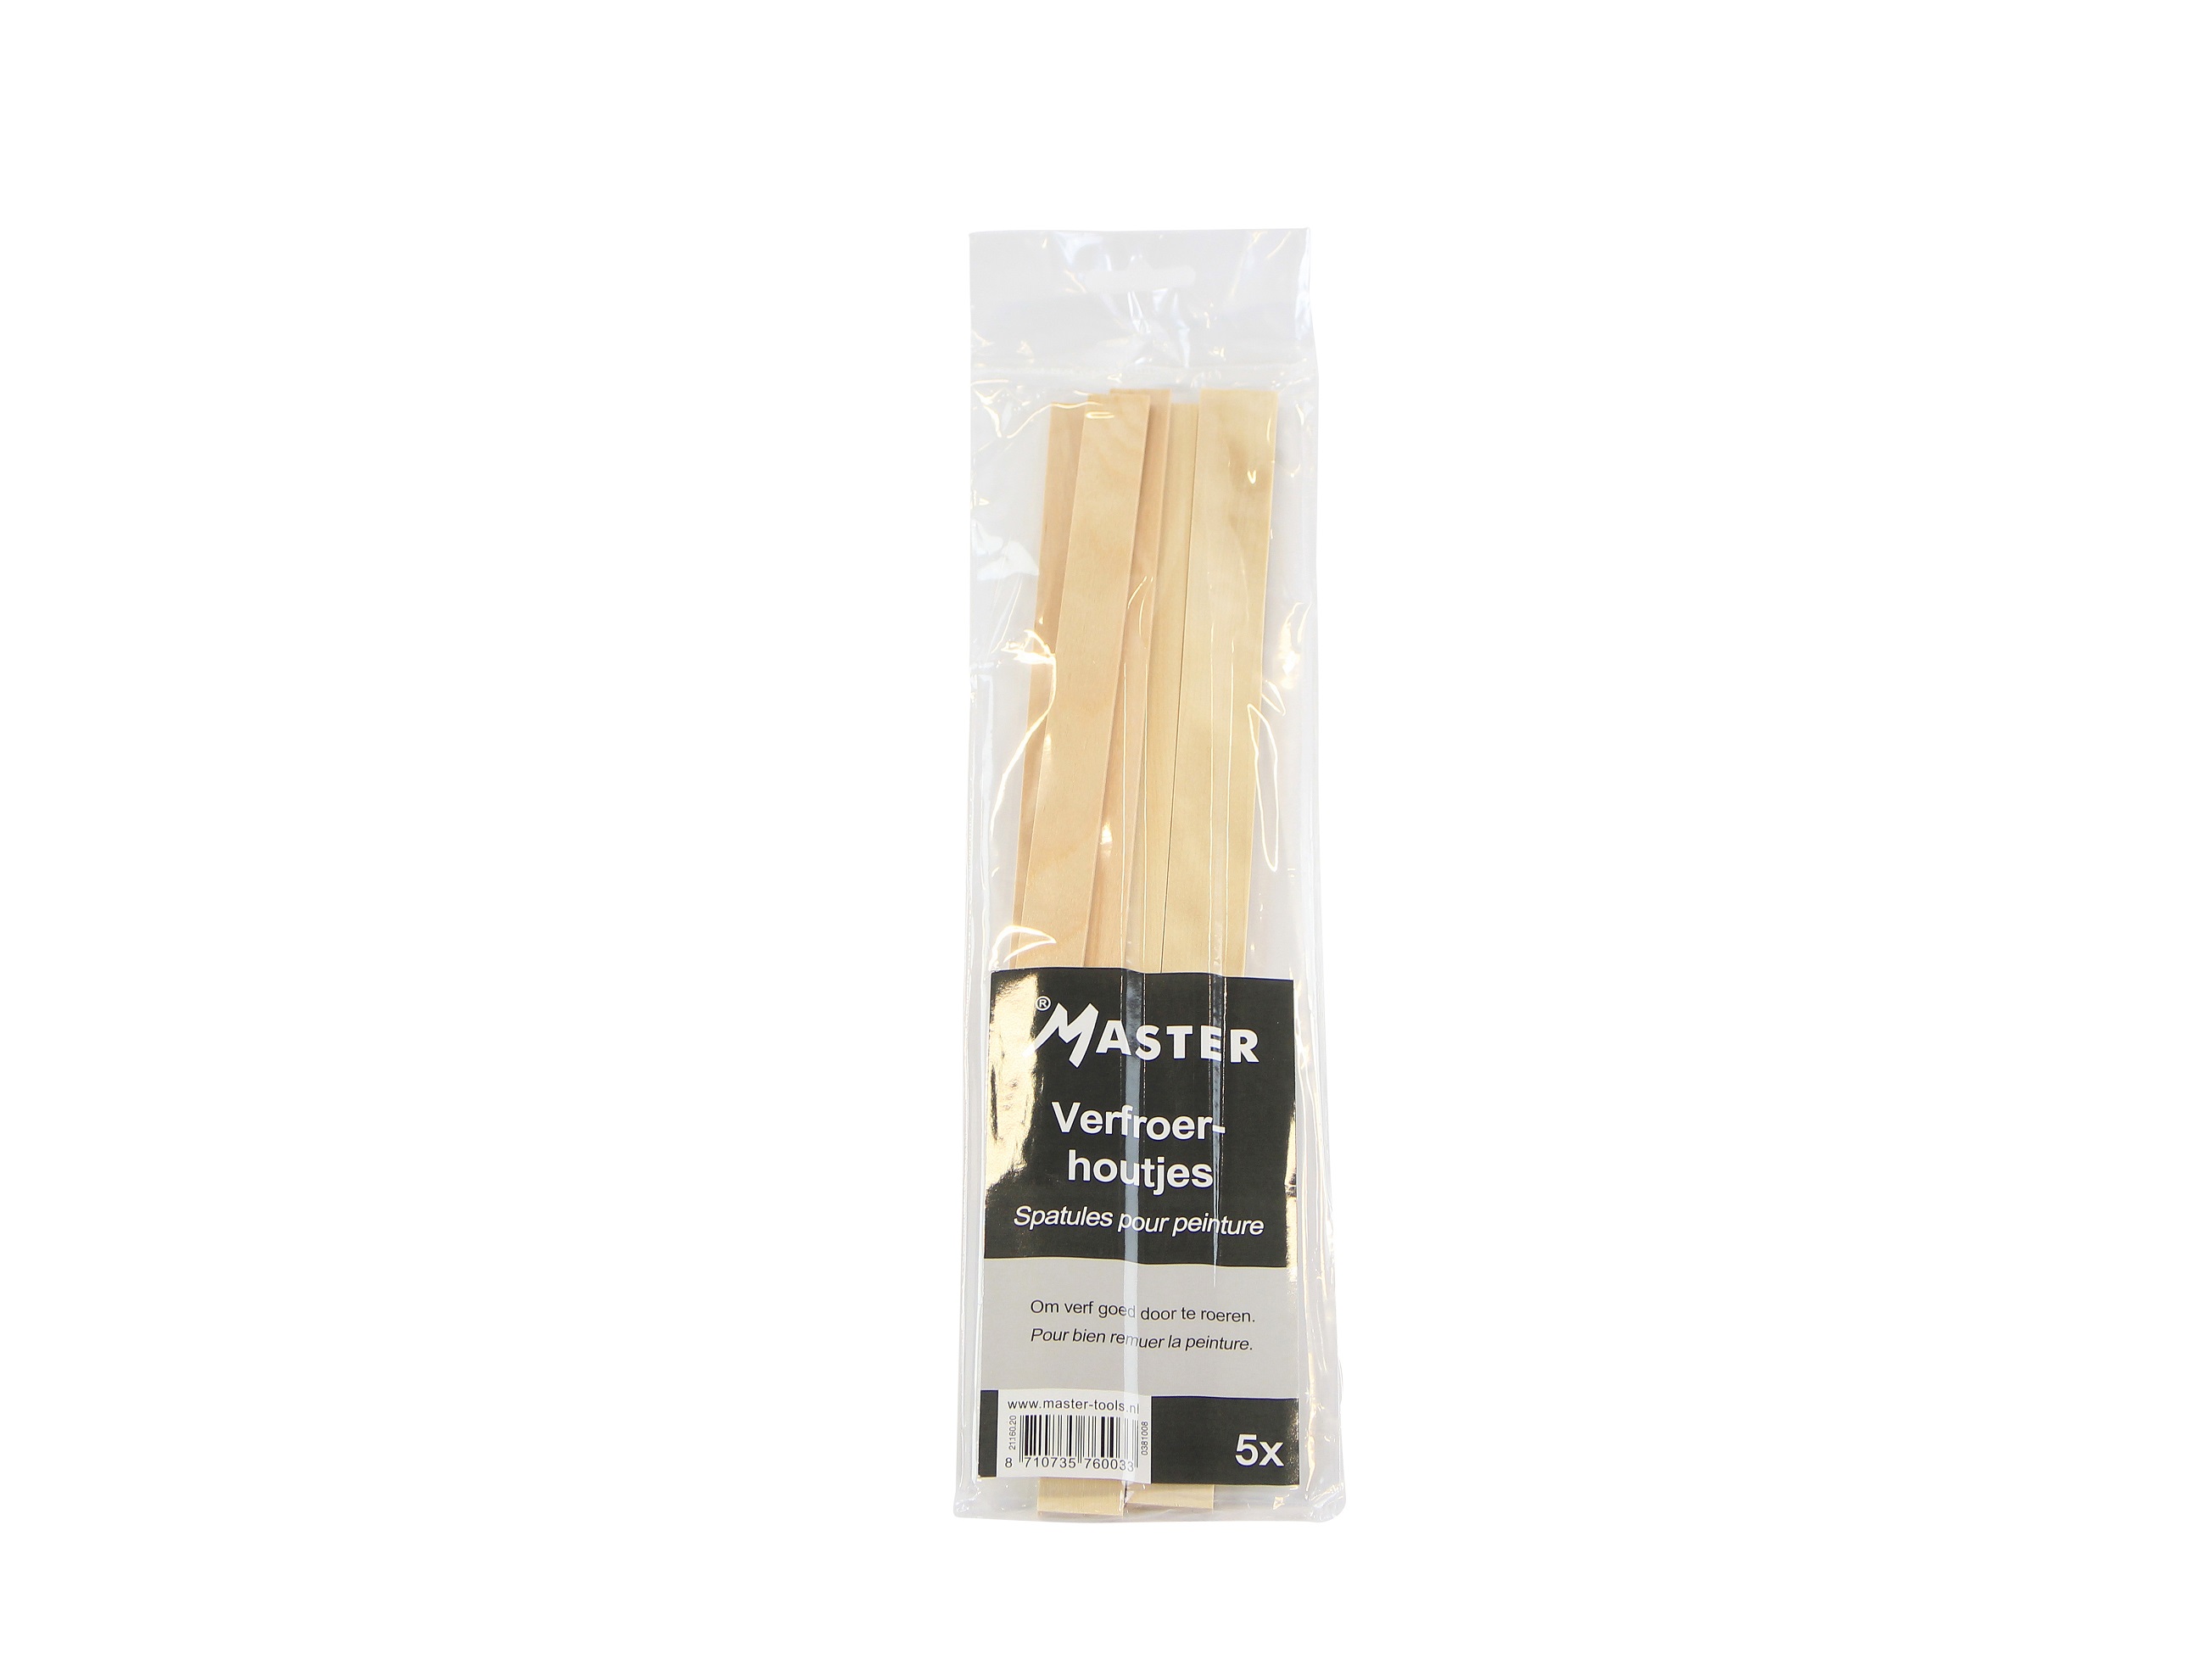 Wooden stirrers - mixing sticks of wood